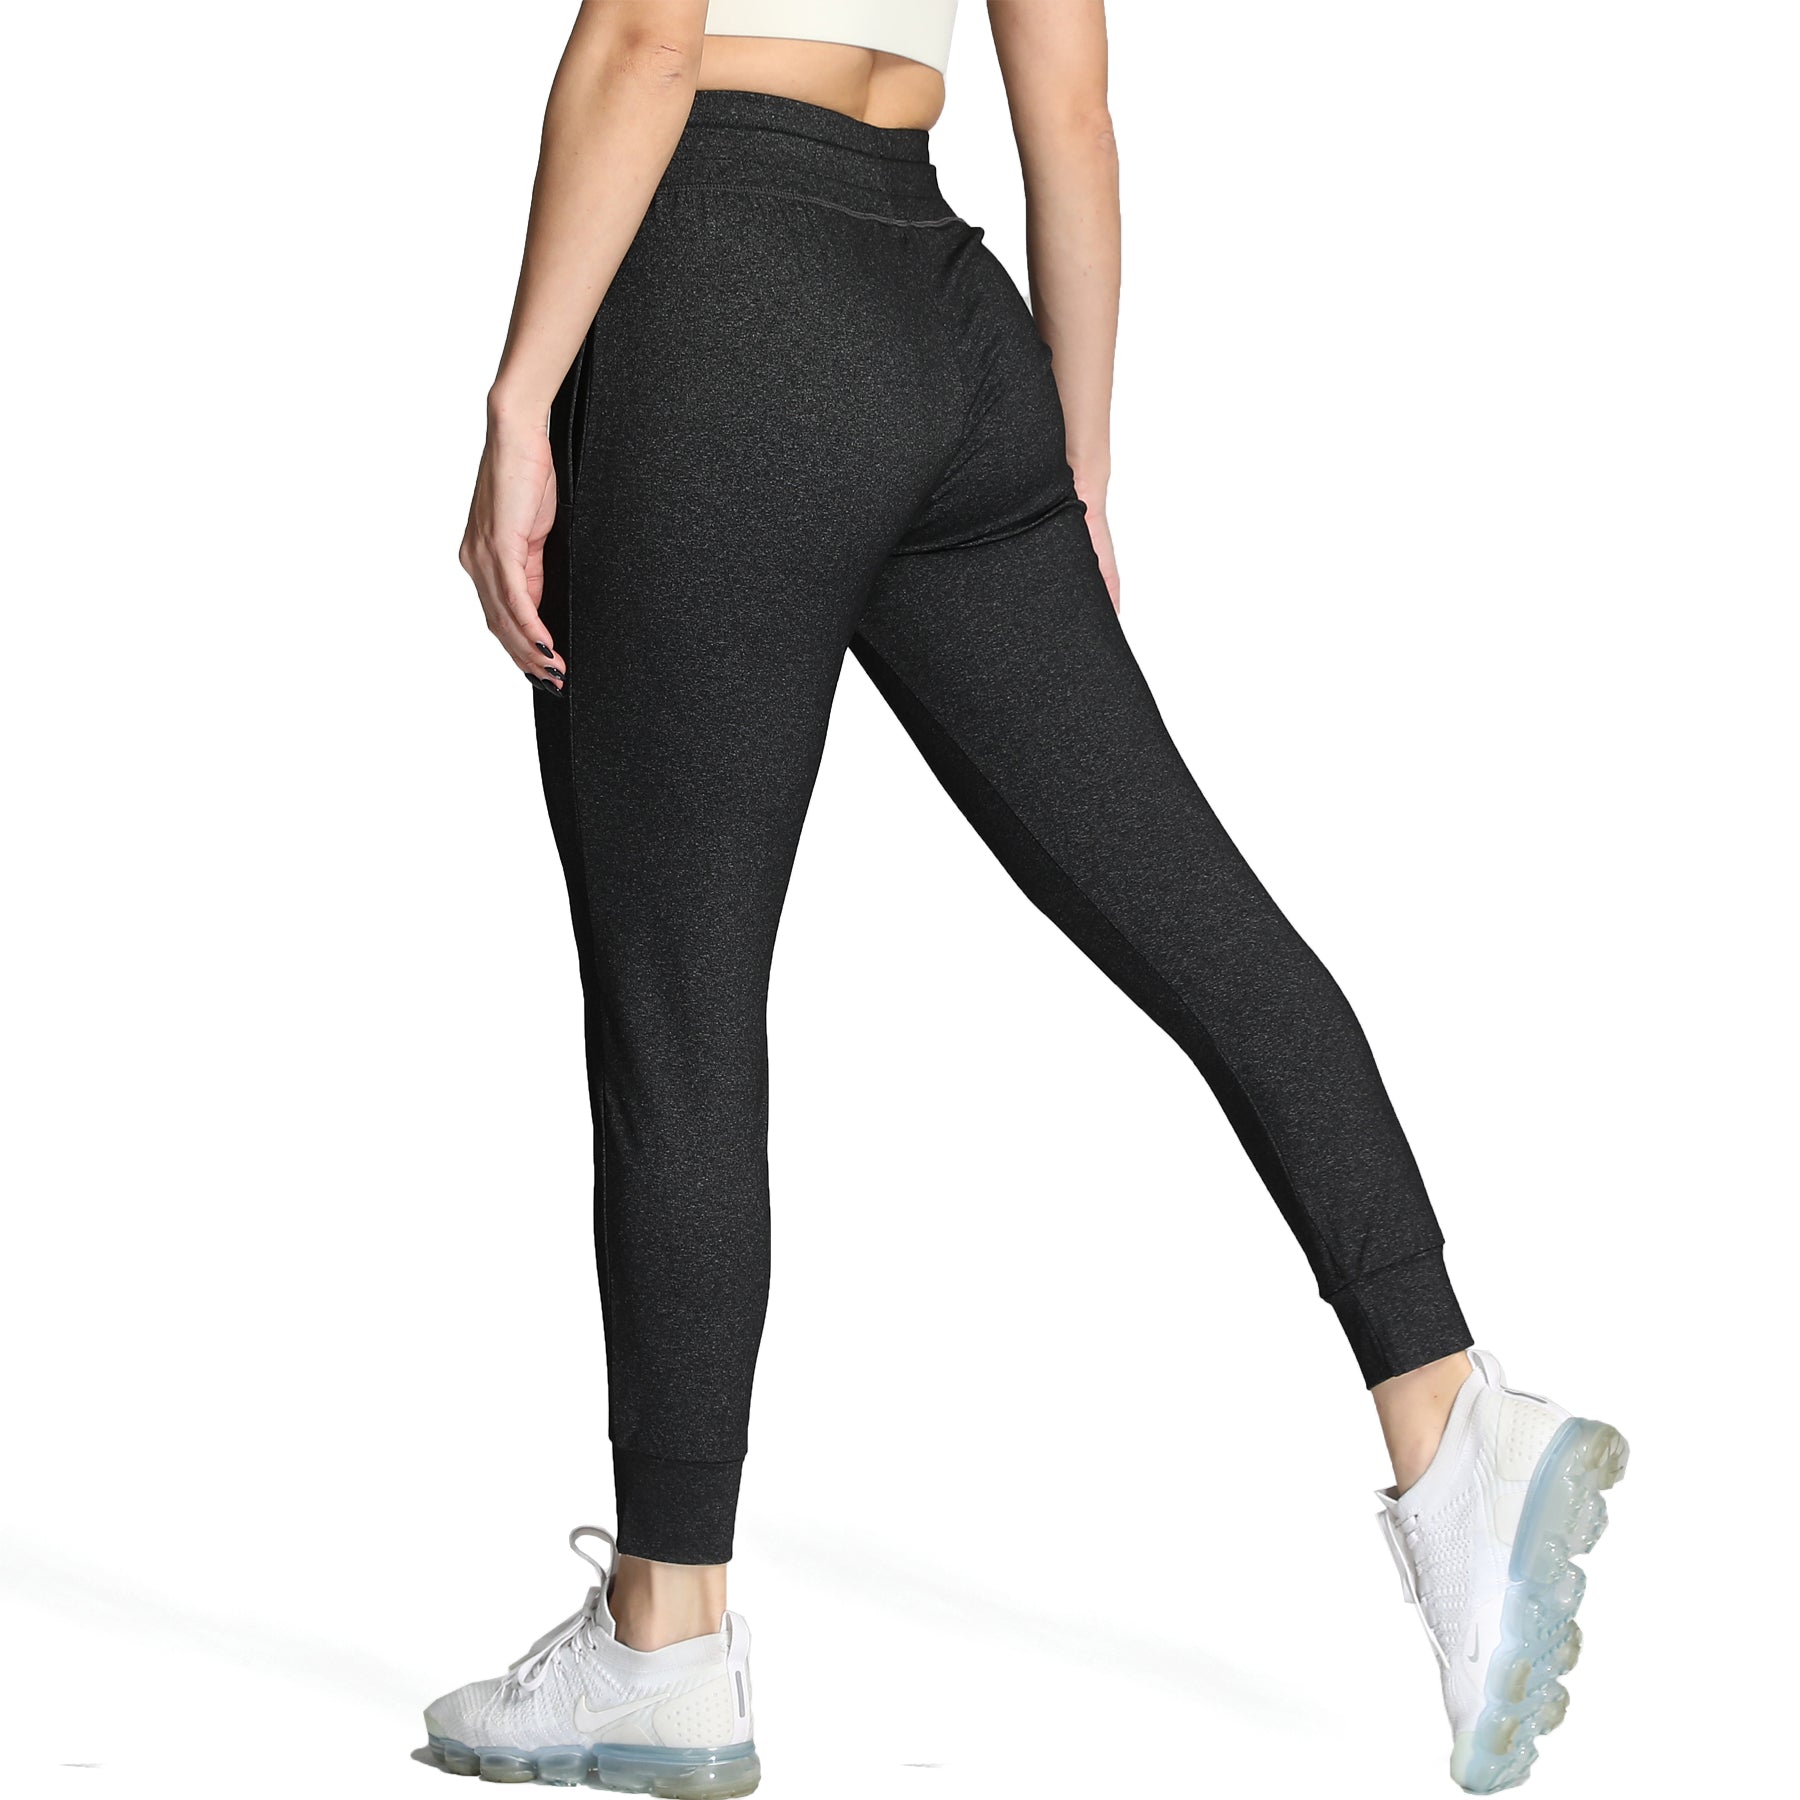 Aoxjox 25 Fitted Jogger Leggings